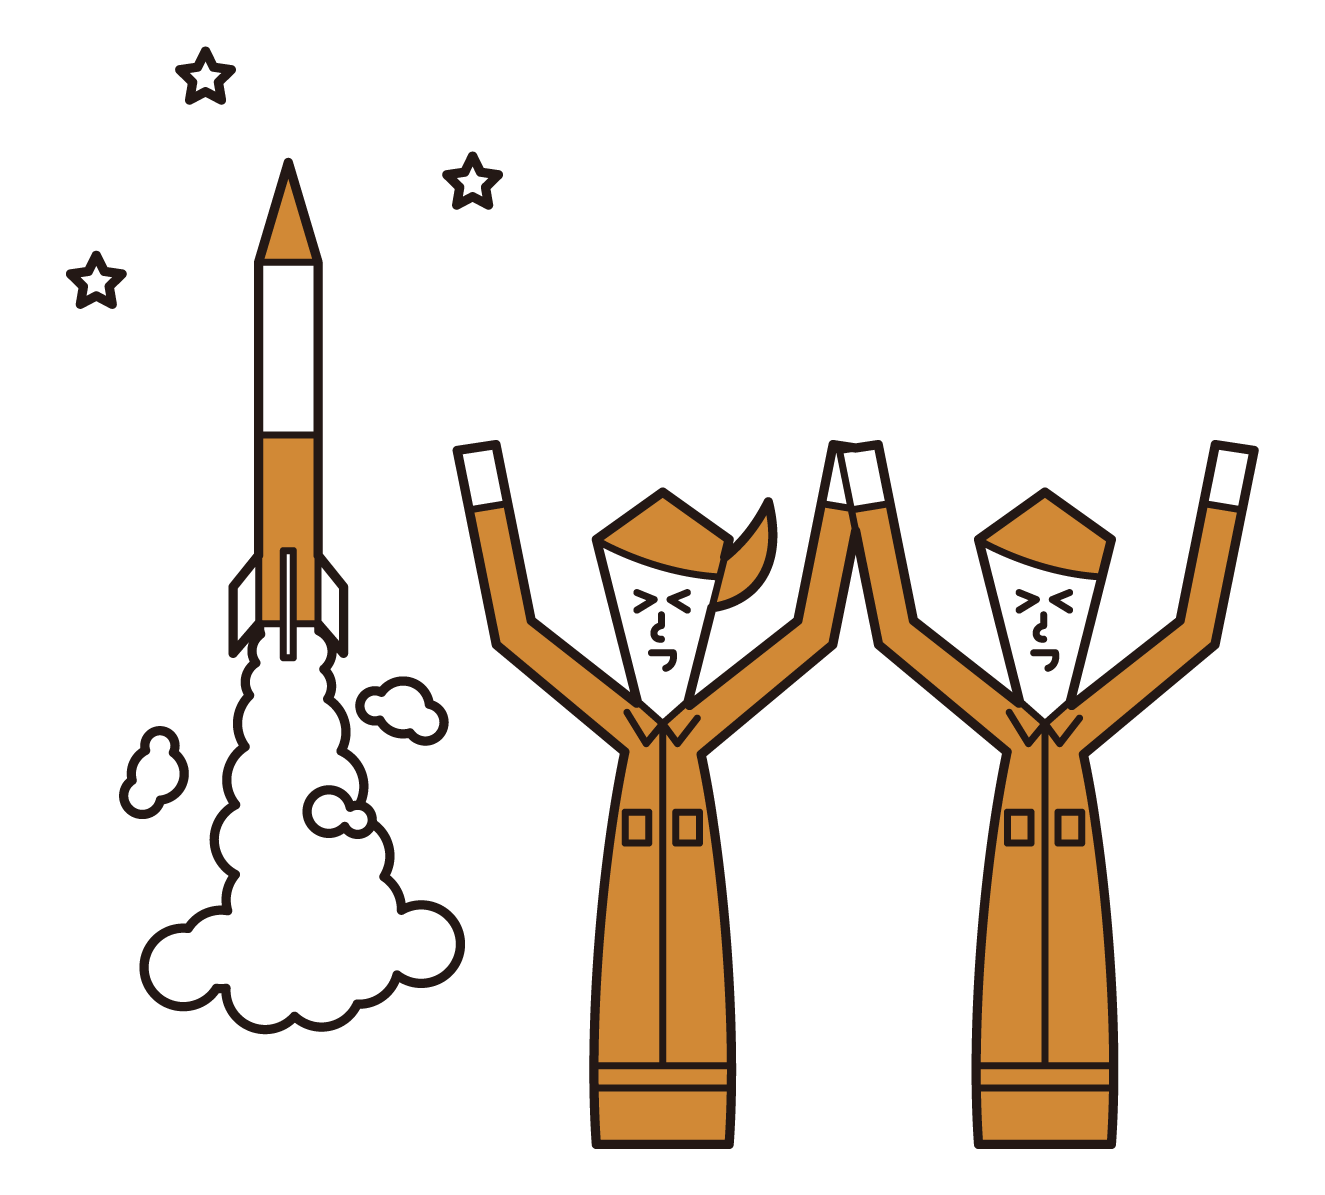 Illustrations of people who successfully launched the rocket